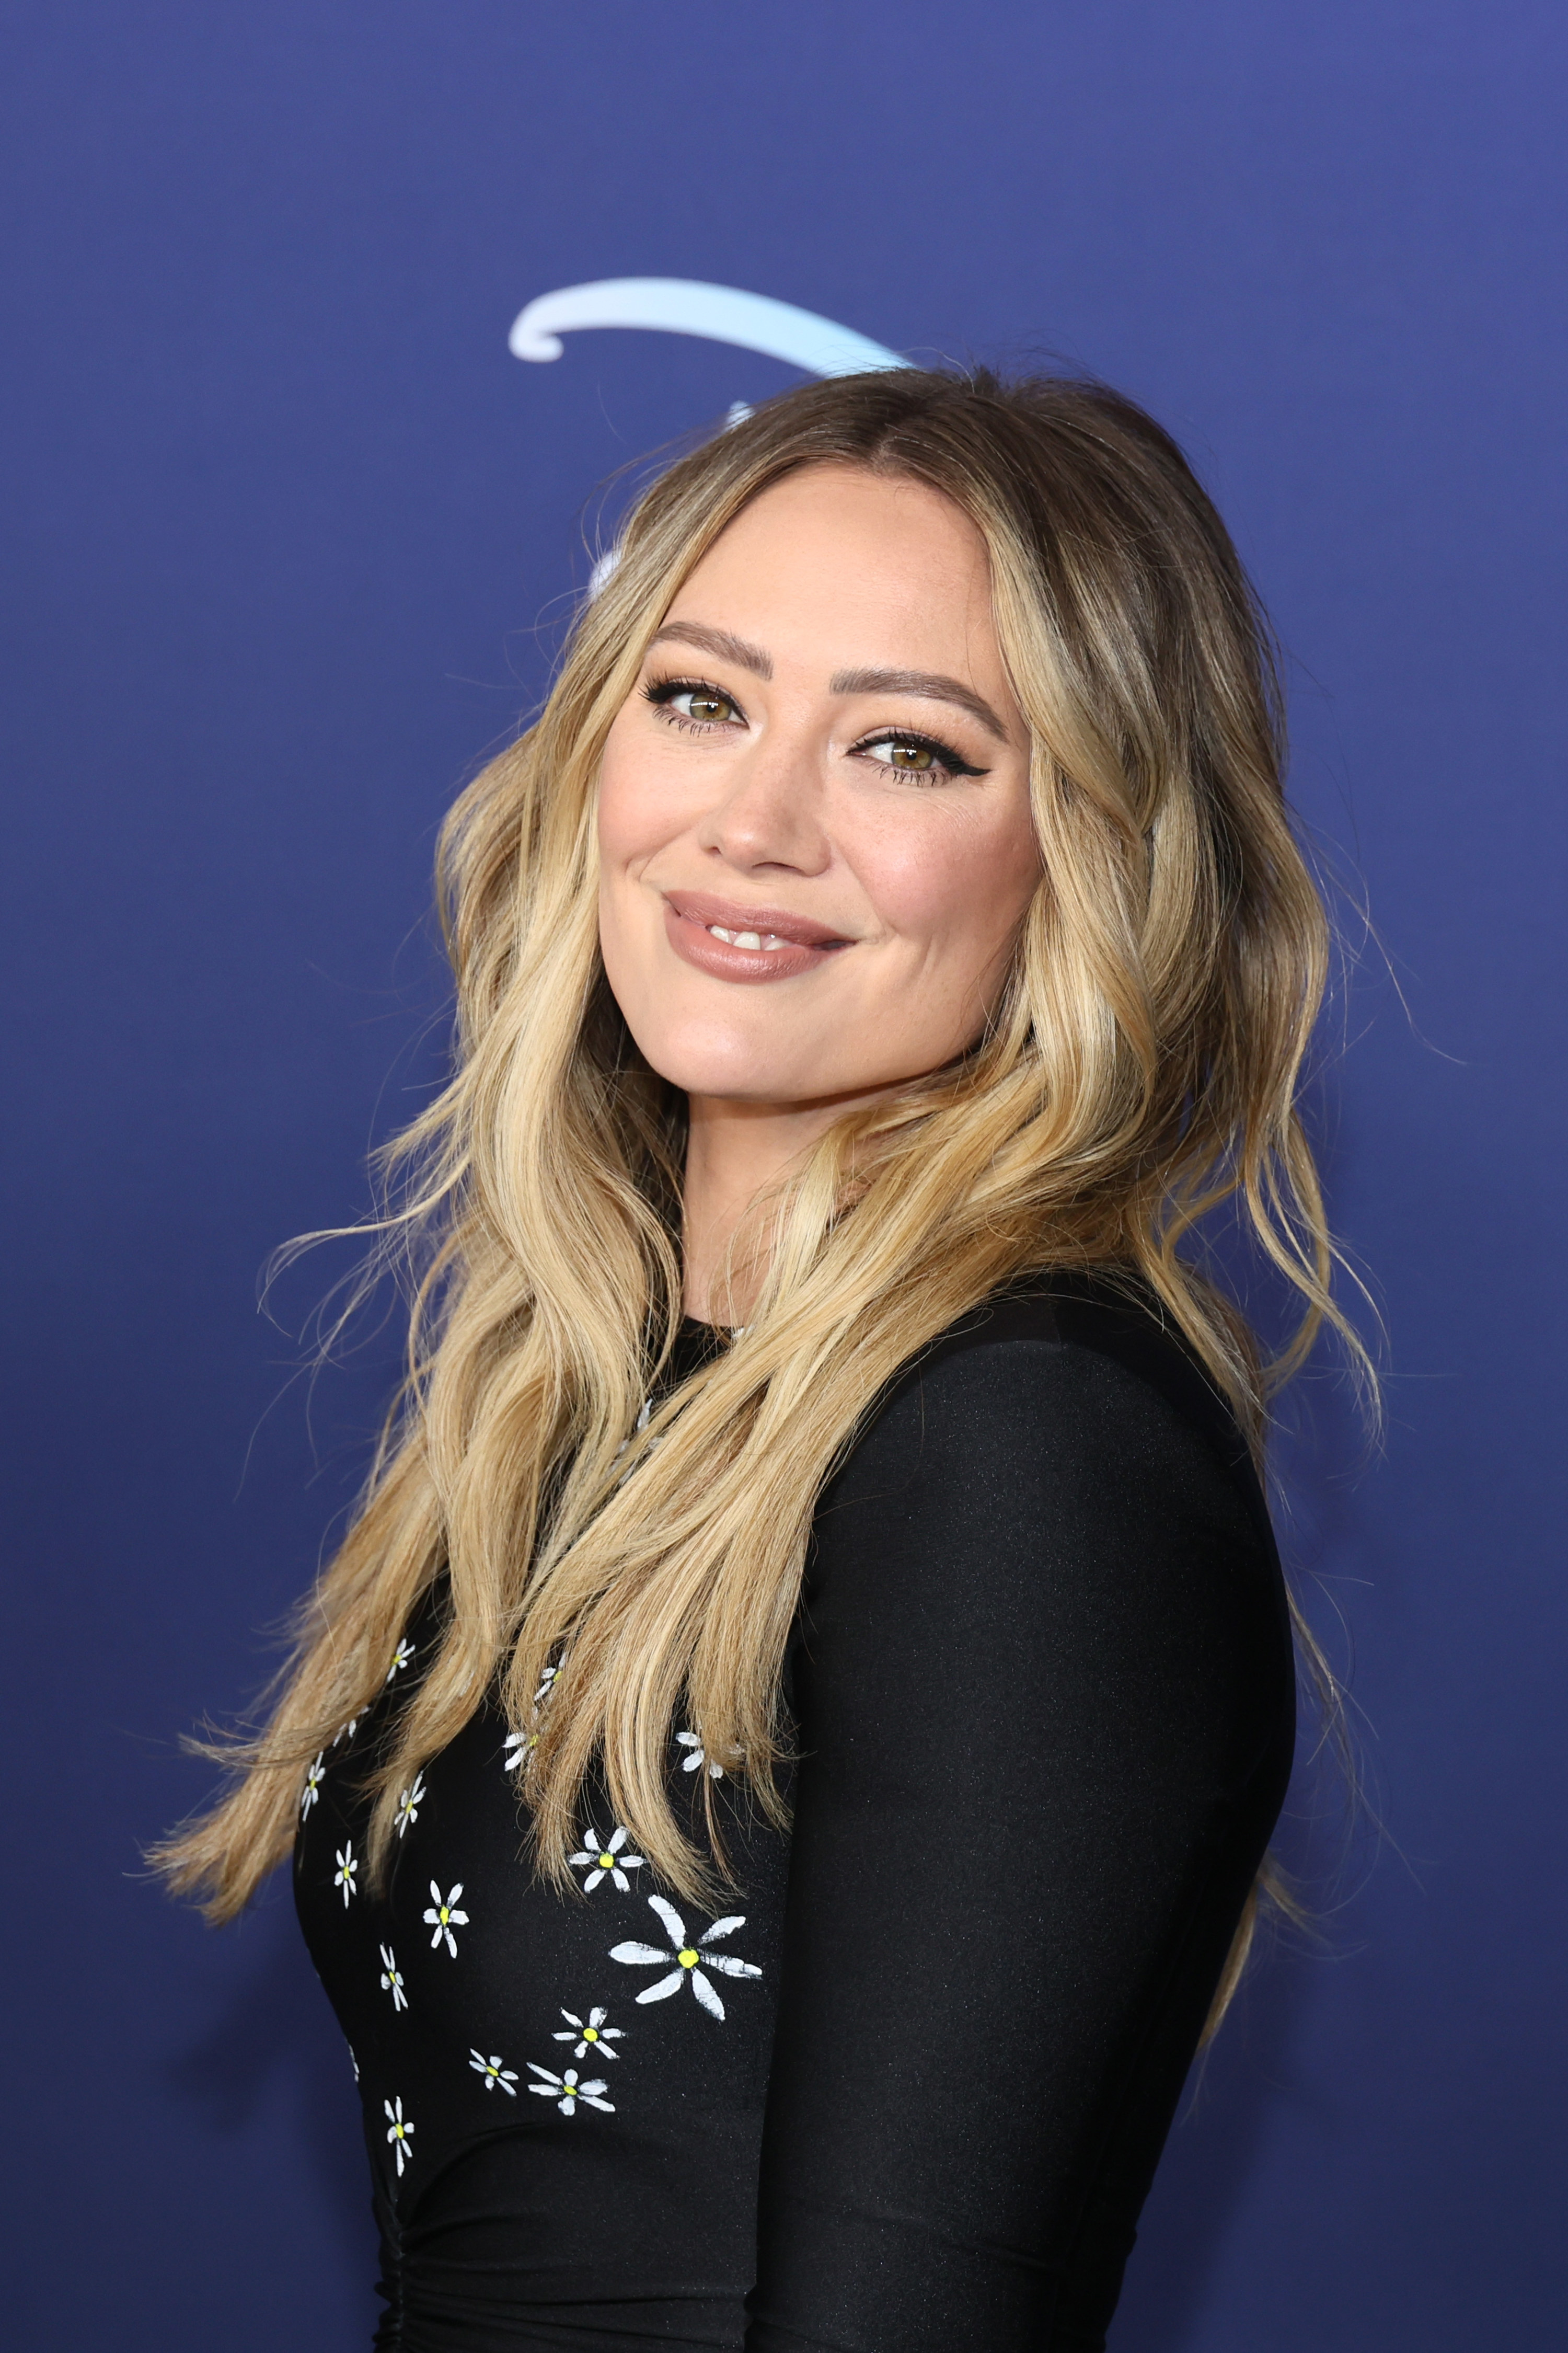 Hilary Duff attends the 2022 ABC Disney Upfront at Basketball City